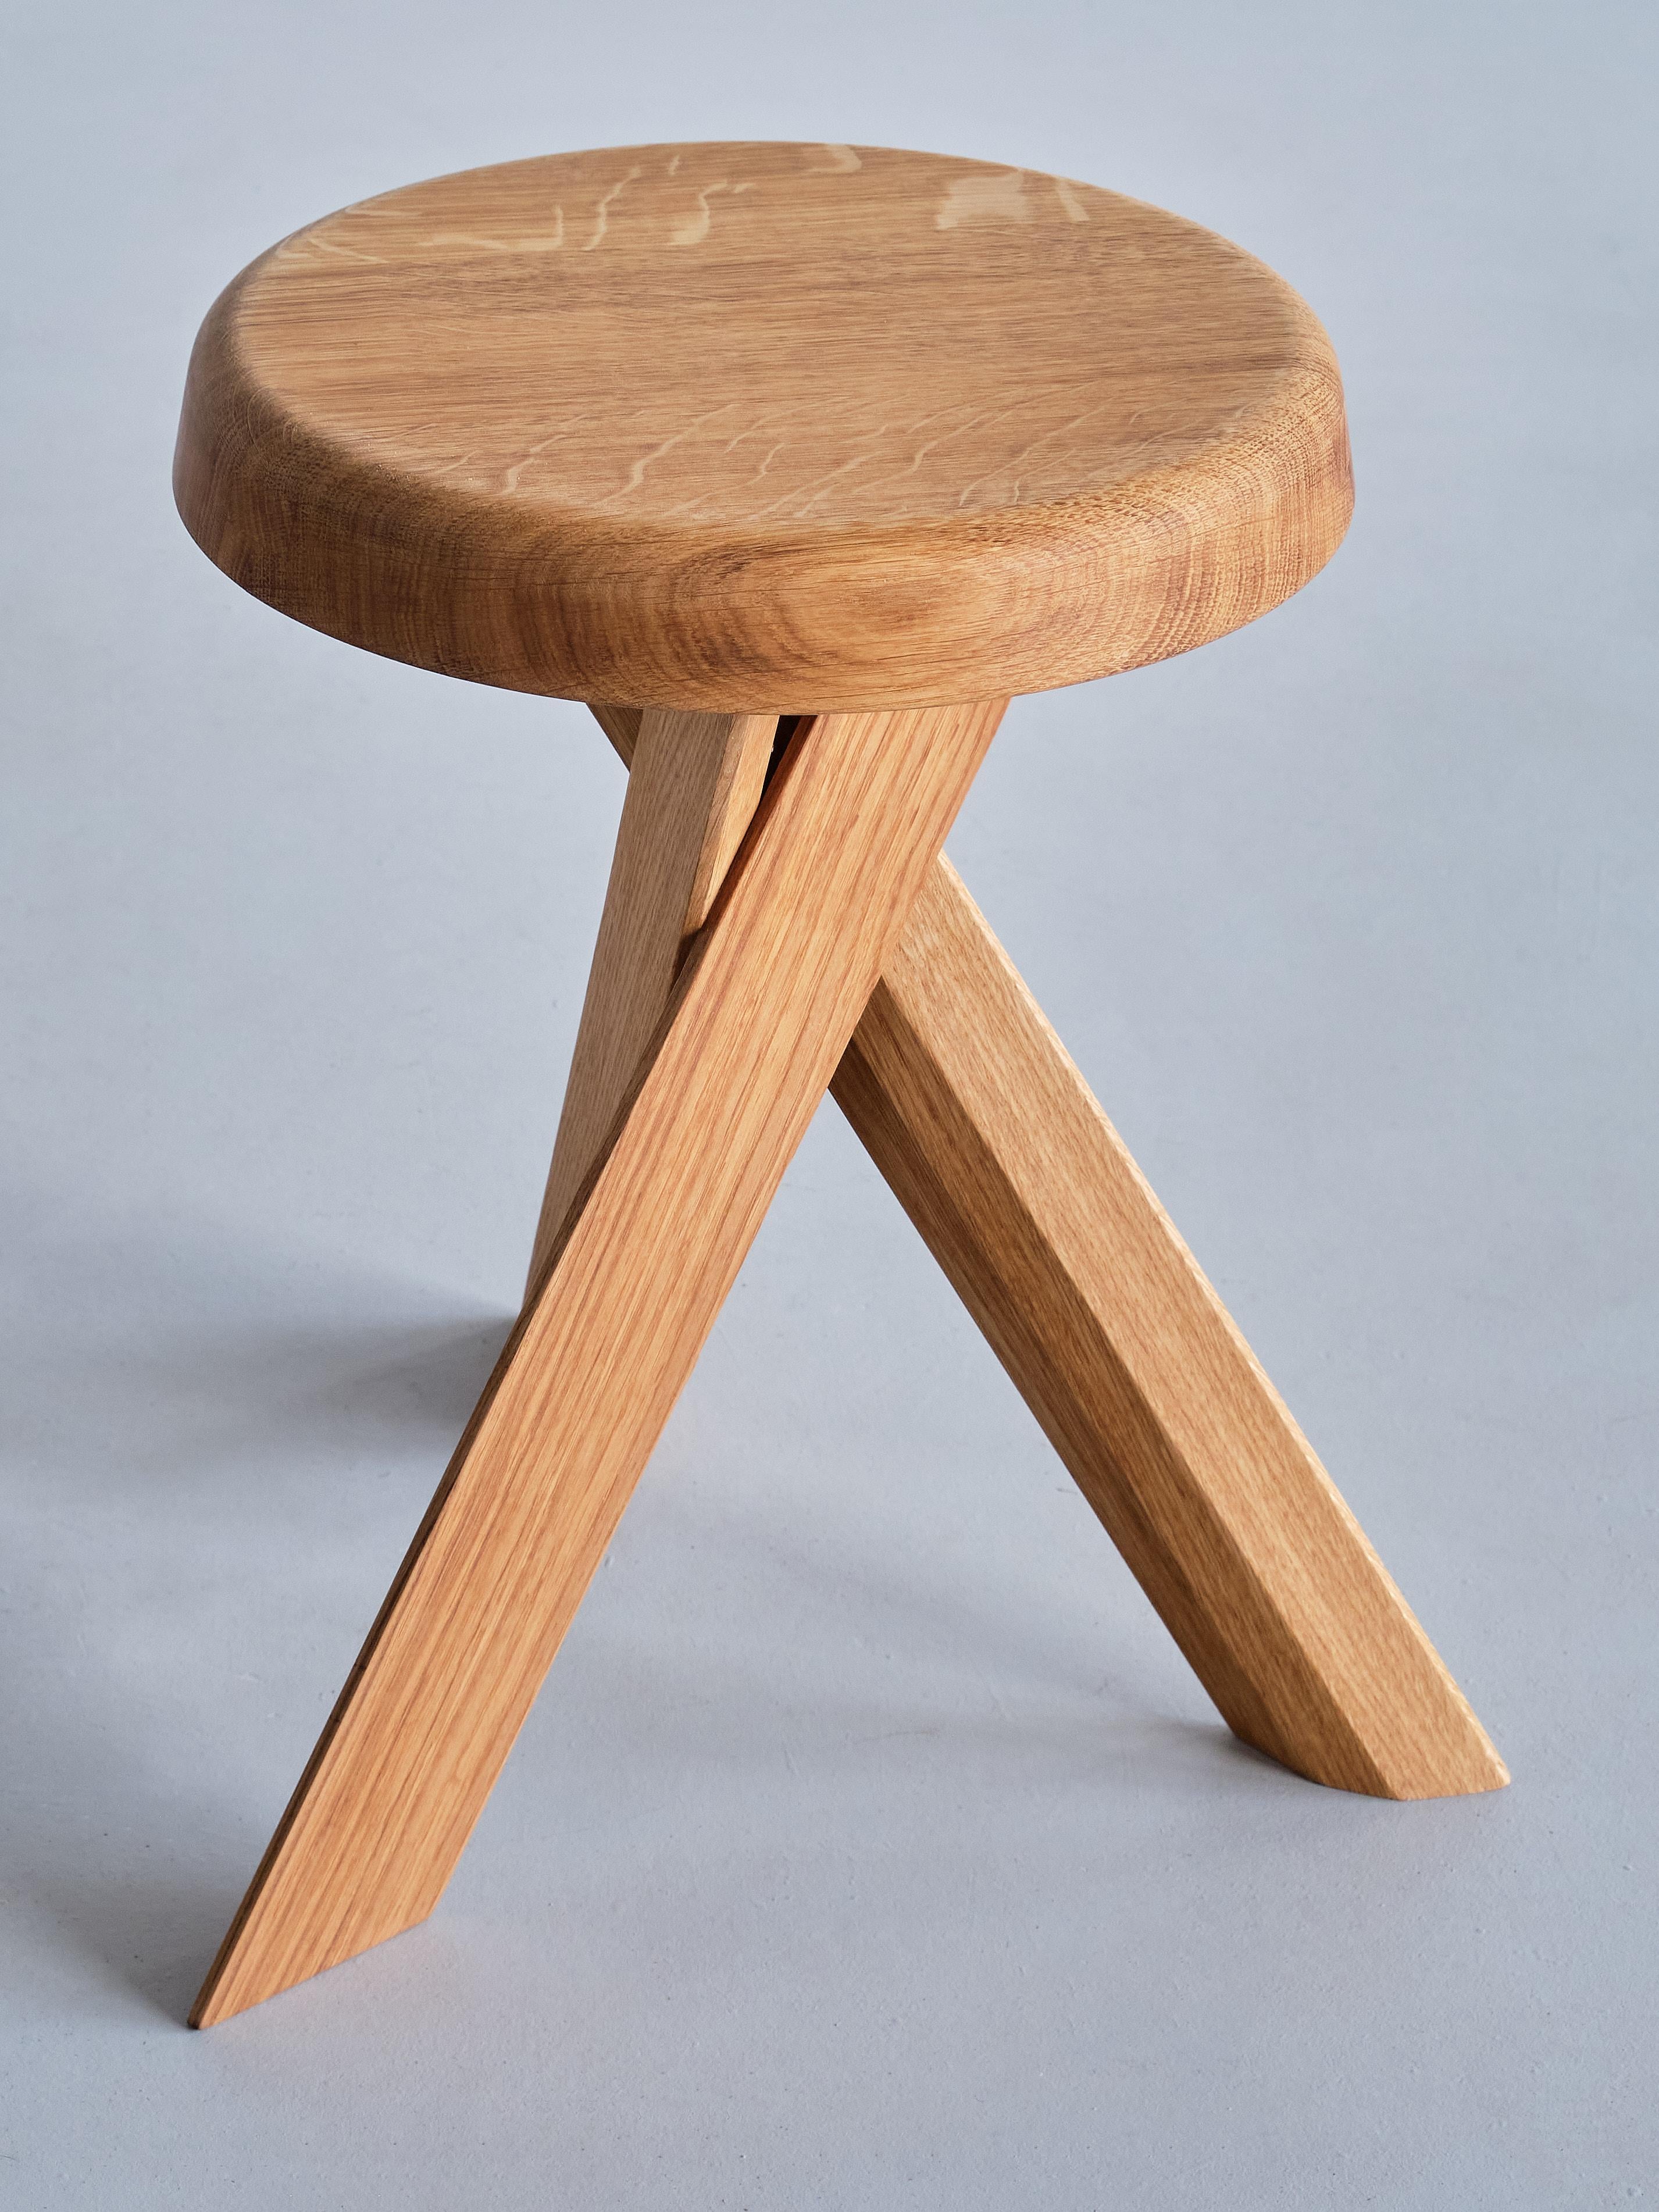 Pierre Chapo S31A Stool in Solid Oak Wood, Chapo Creation, France In New Condition For Sale In The Hague, NL